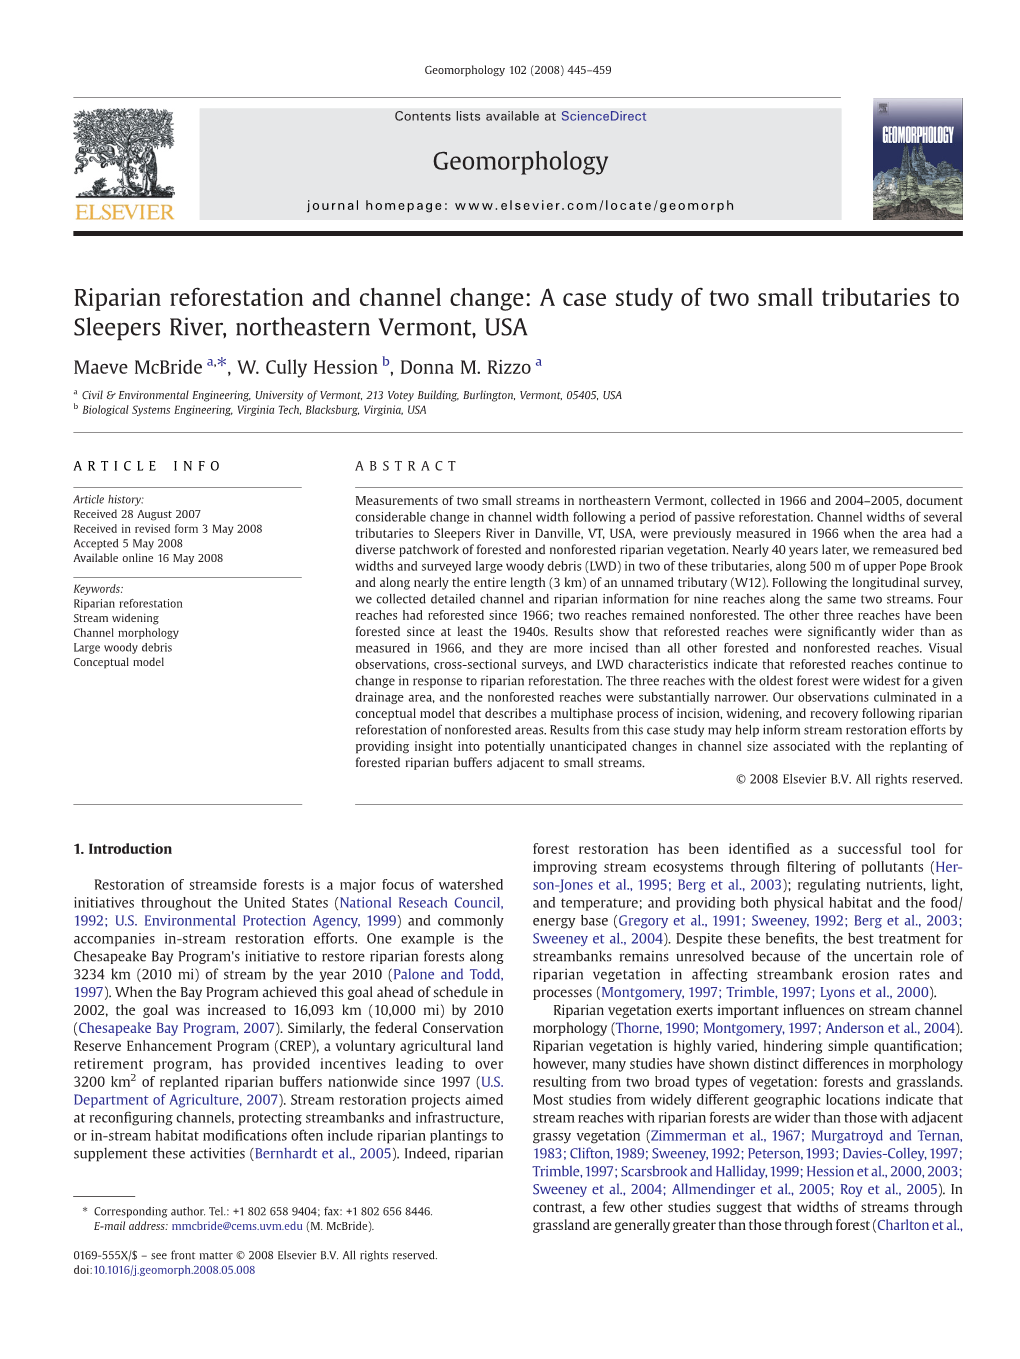 Riparian Reforestation and Channel Change: a Case Study of Two Small Tributaries to Sleepers River, Northeastern Vermont, USA